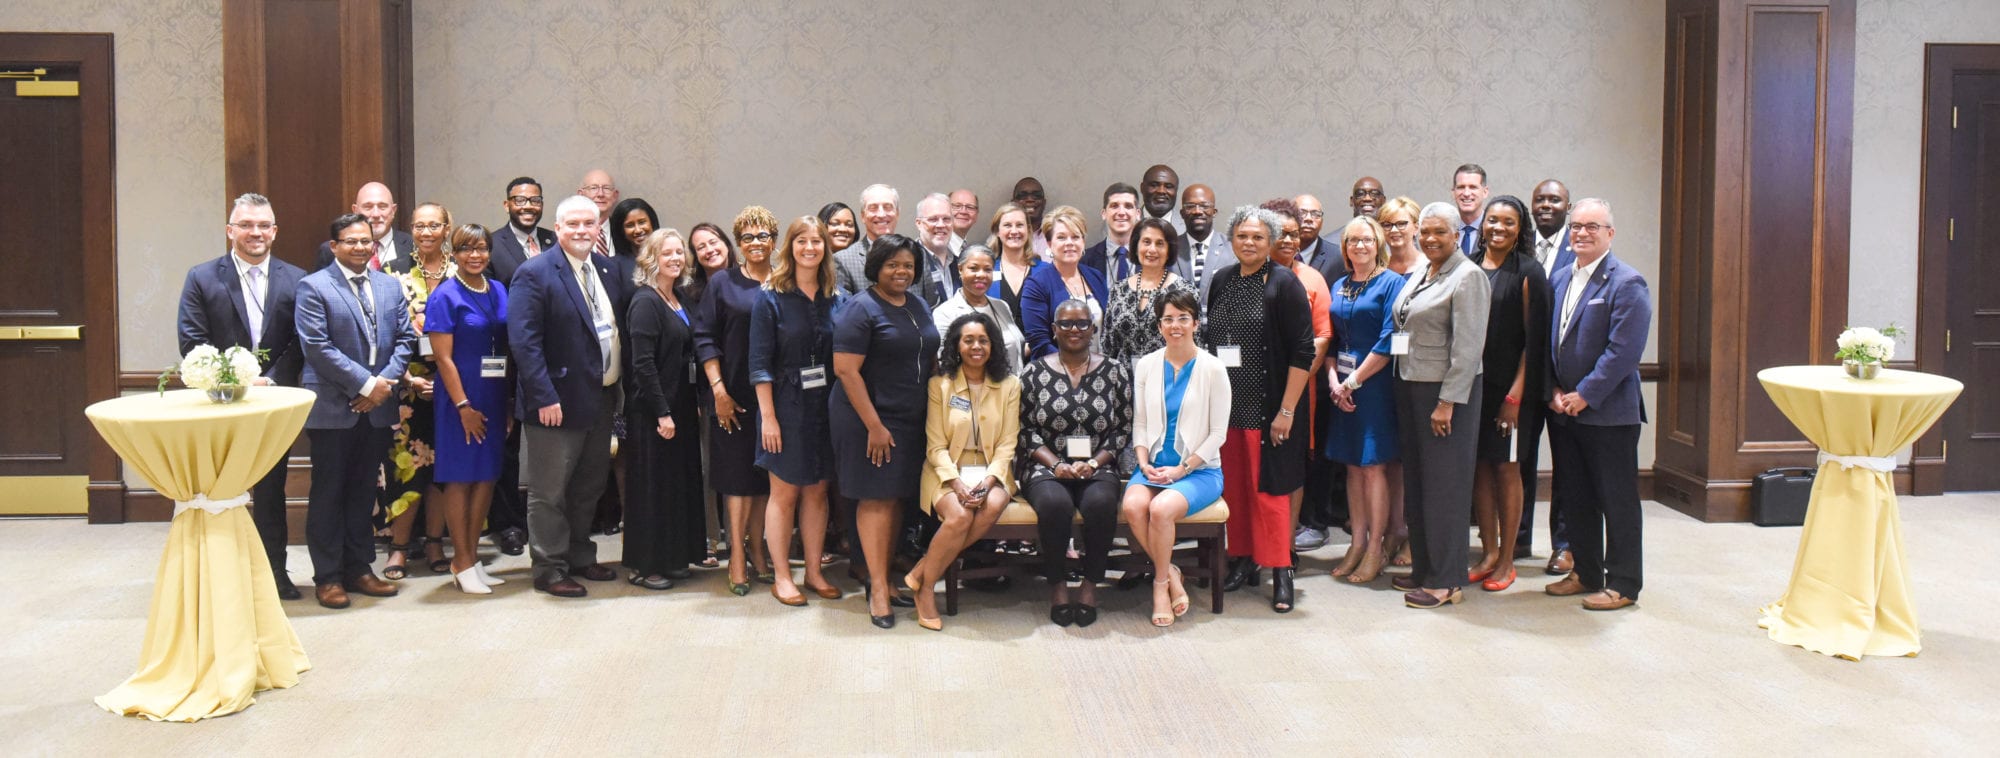 Diversity and Inclusion summit group photo